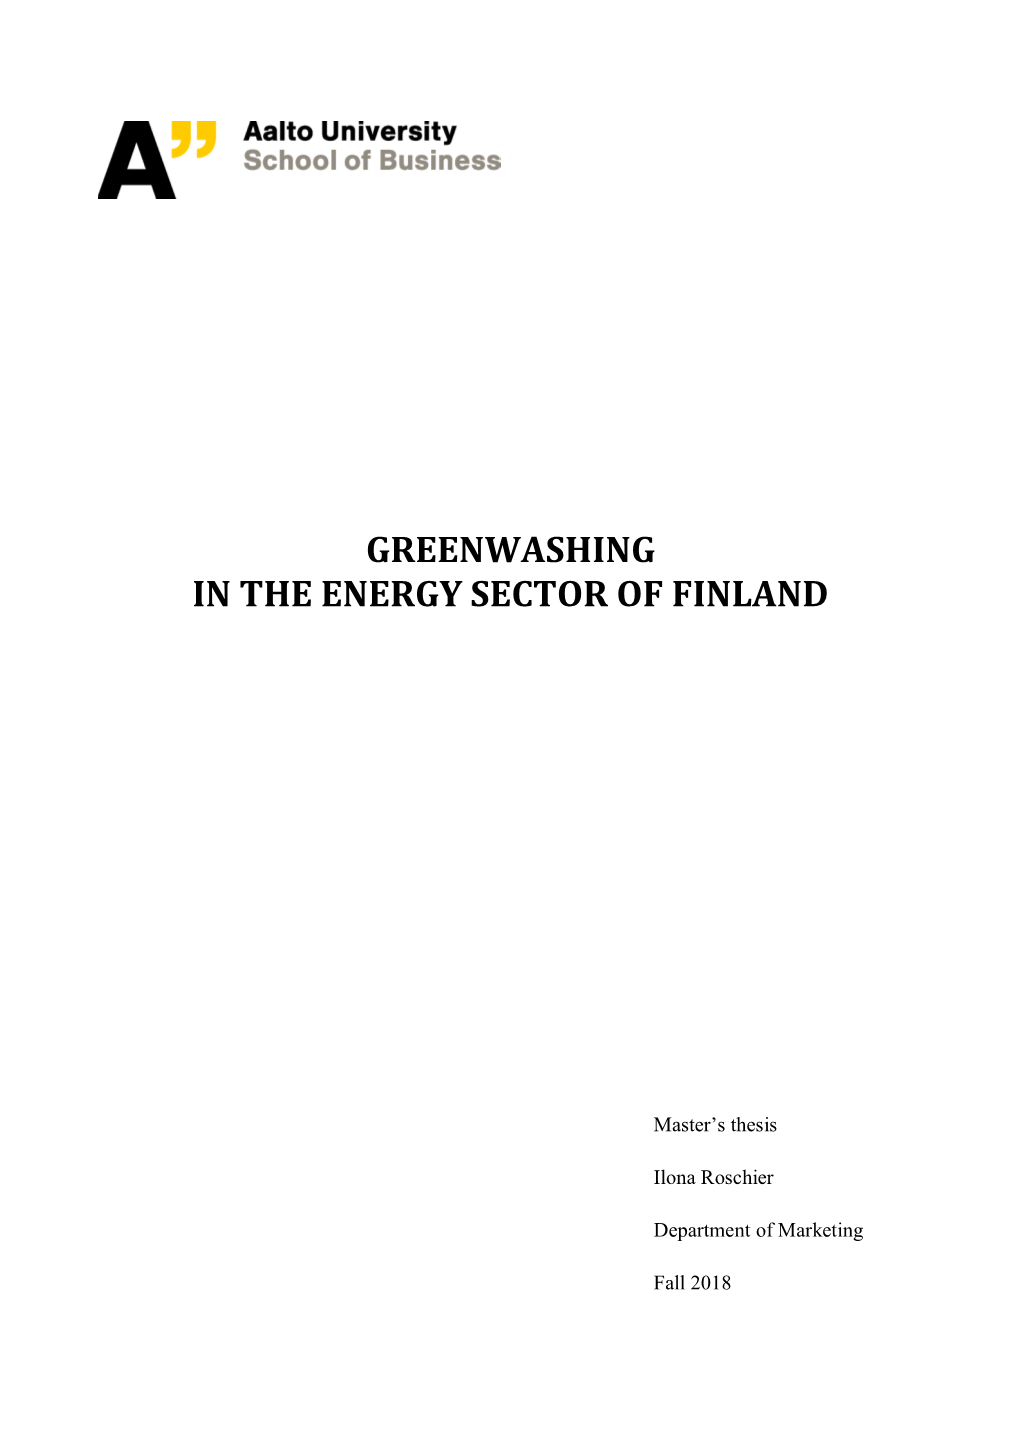 Greenwashing in the Energy Sector of Finland